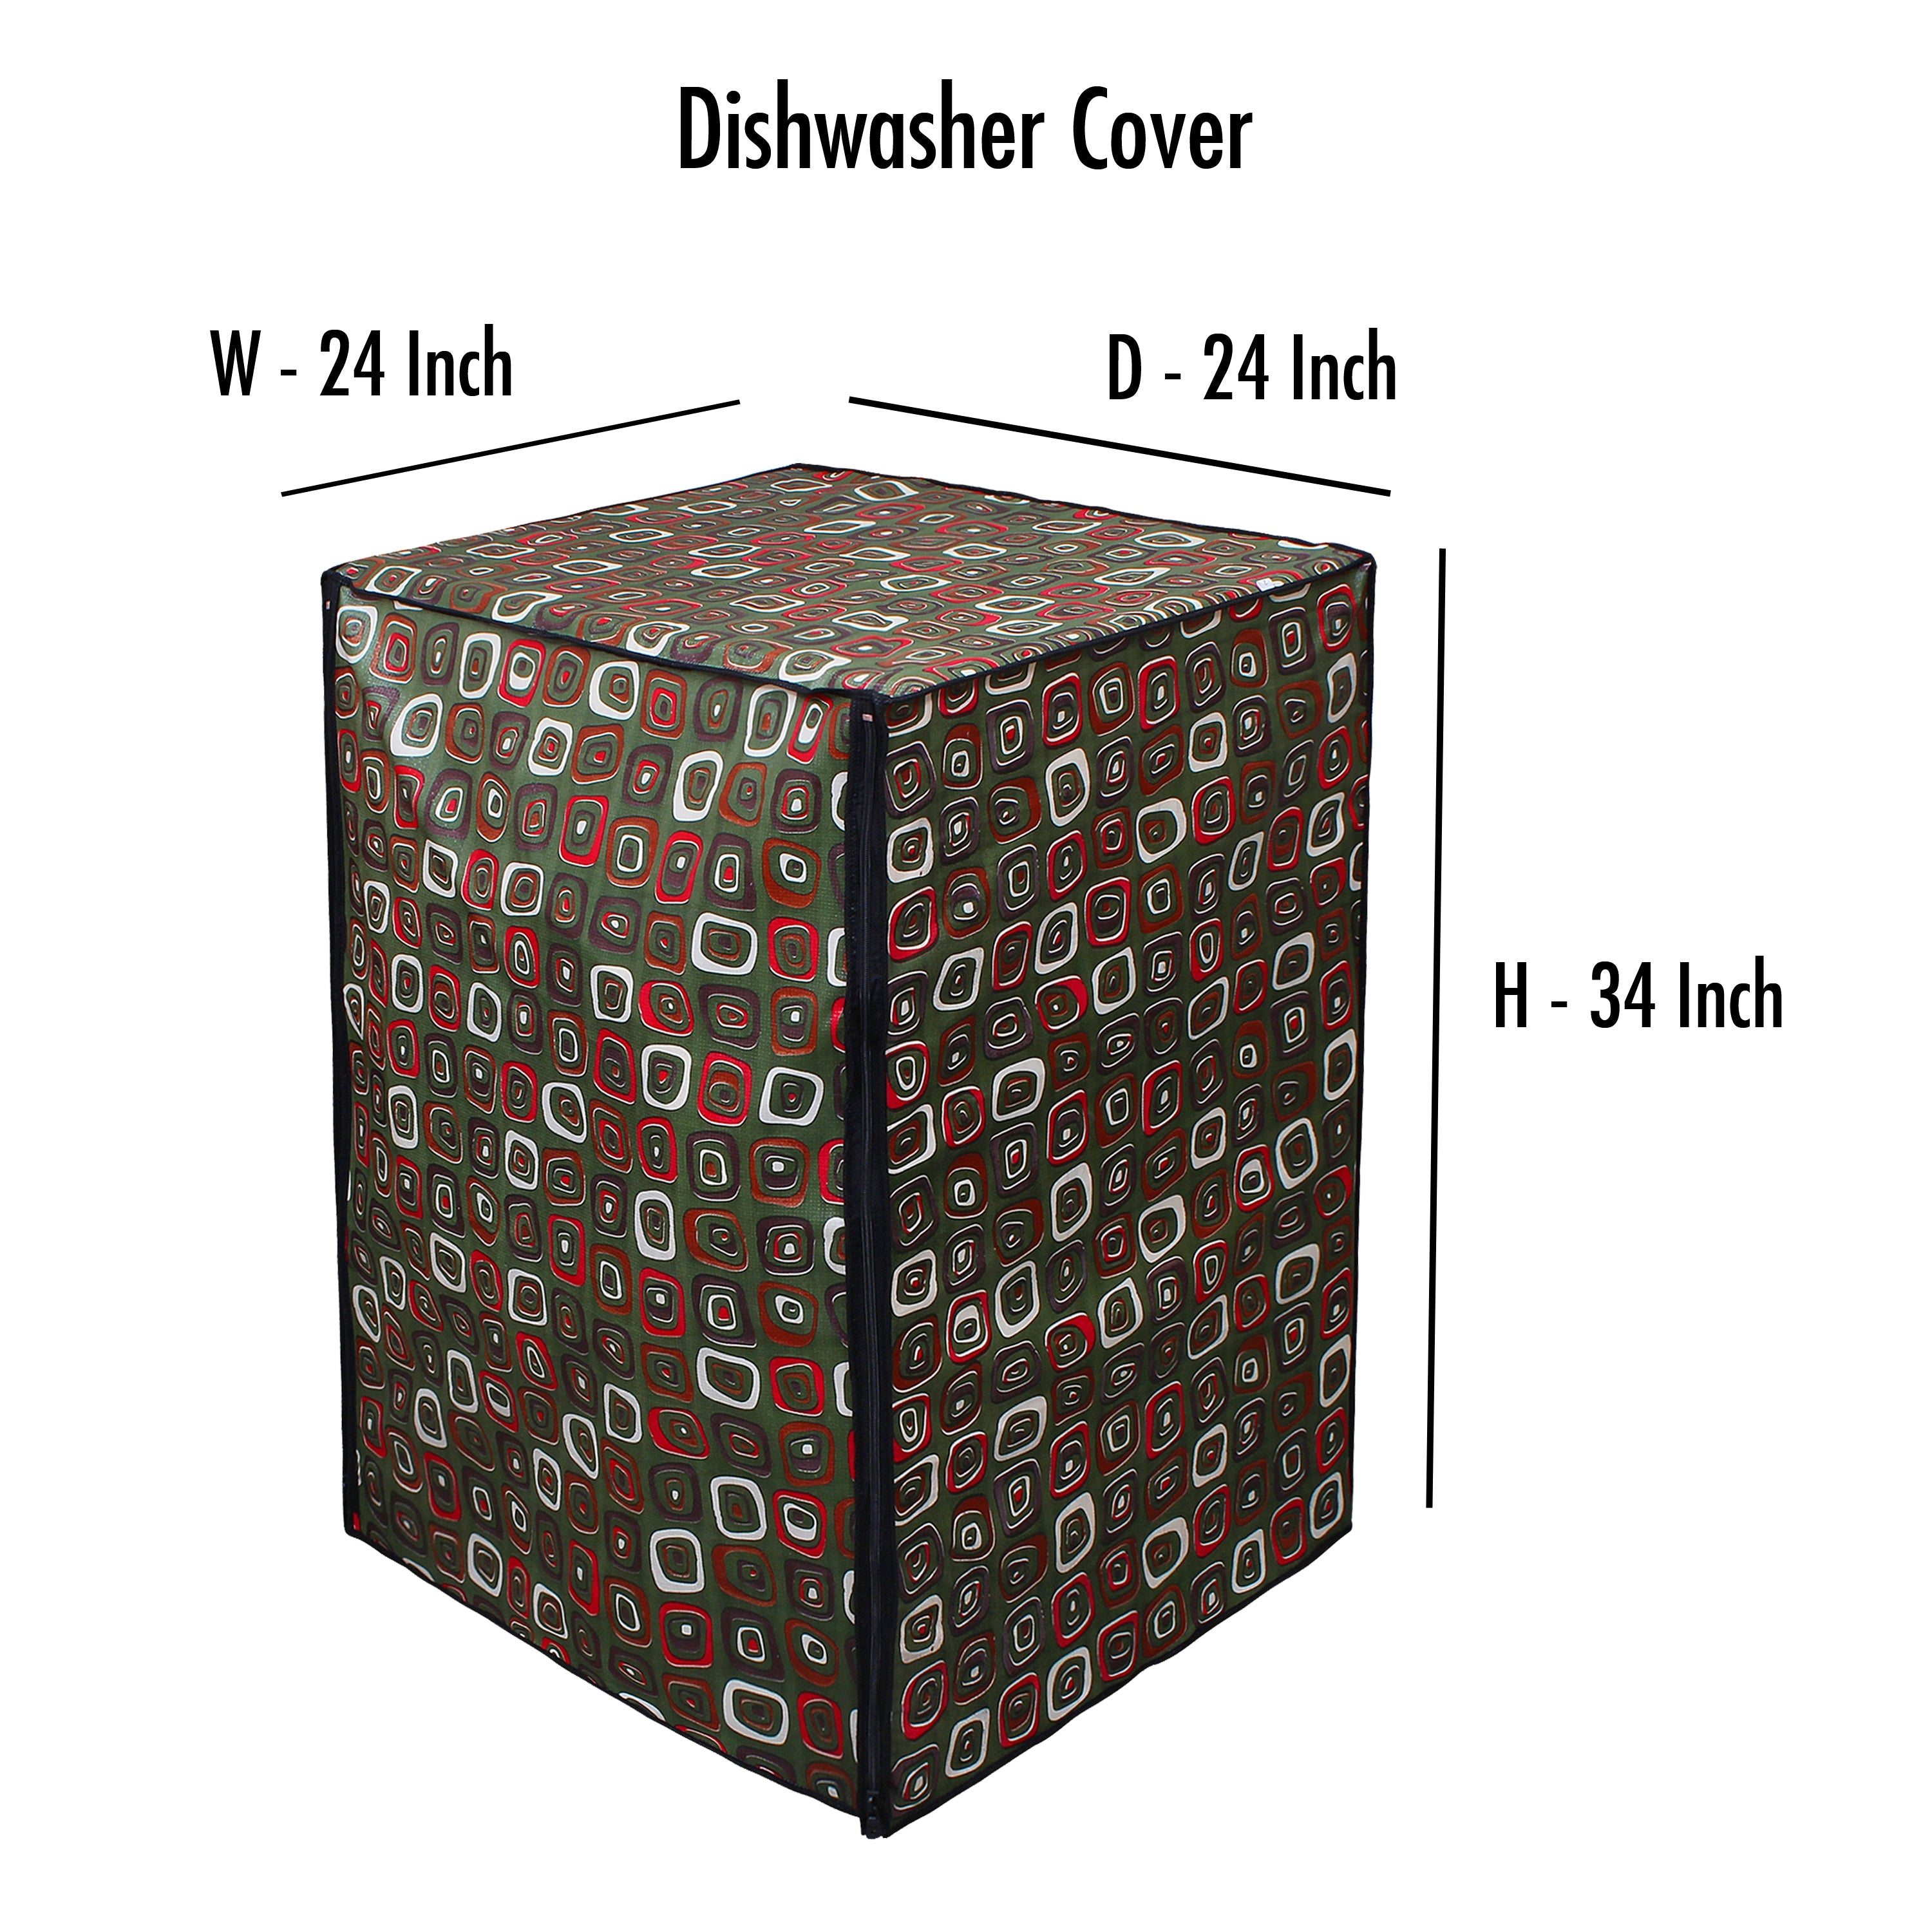 Waterproof and Dustproof Dishwasher Cover, SA63 - Dream Care Furnishings Private Limited